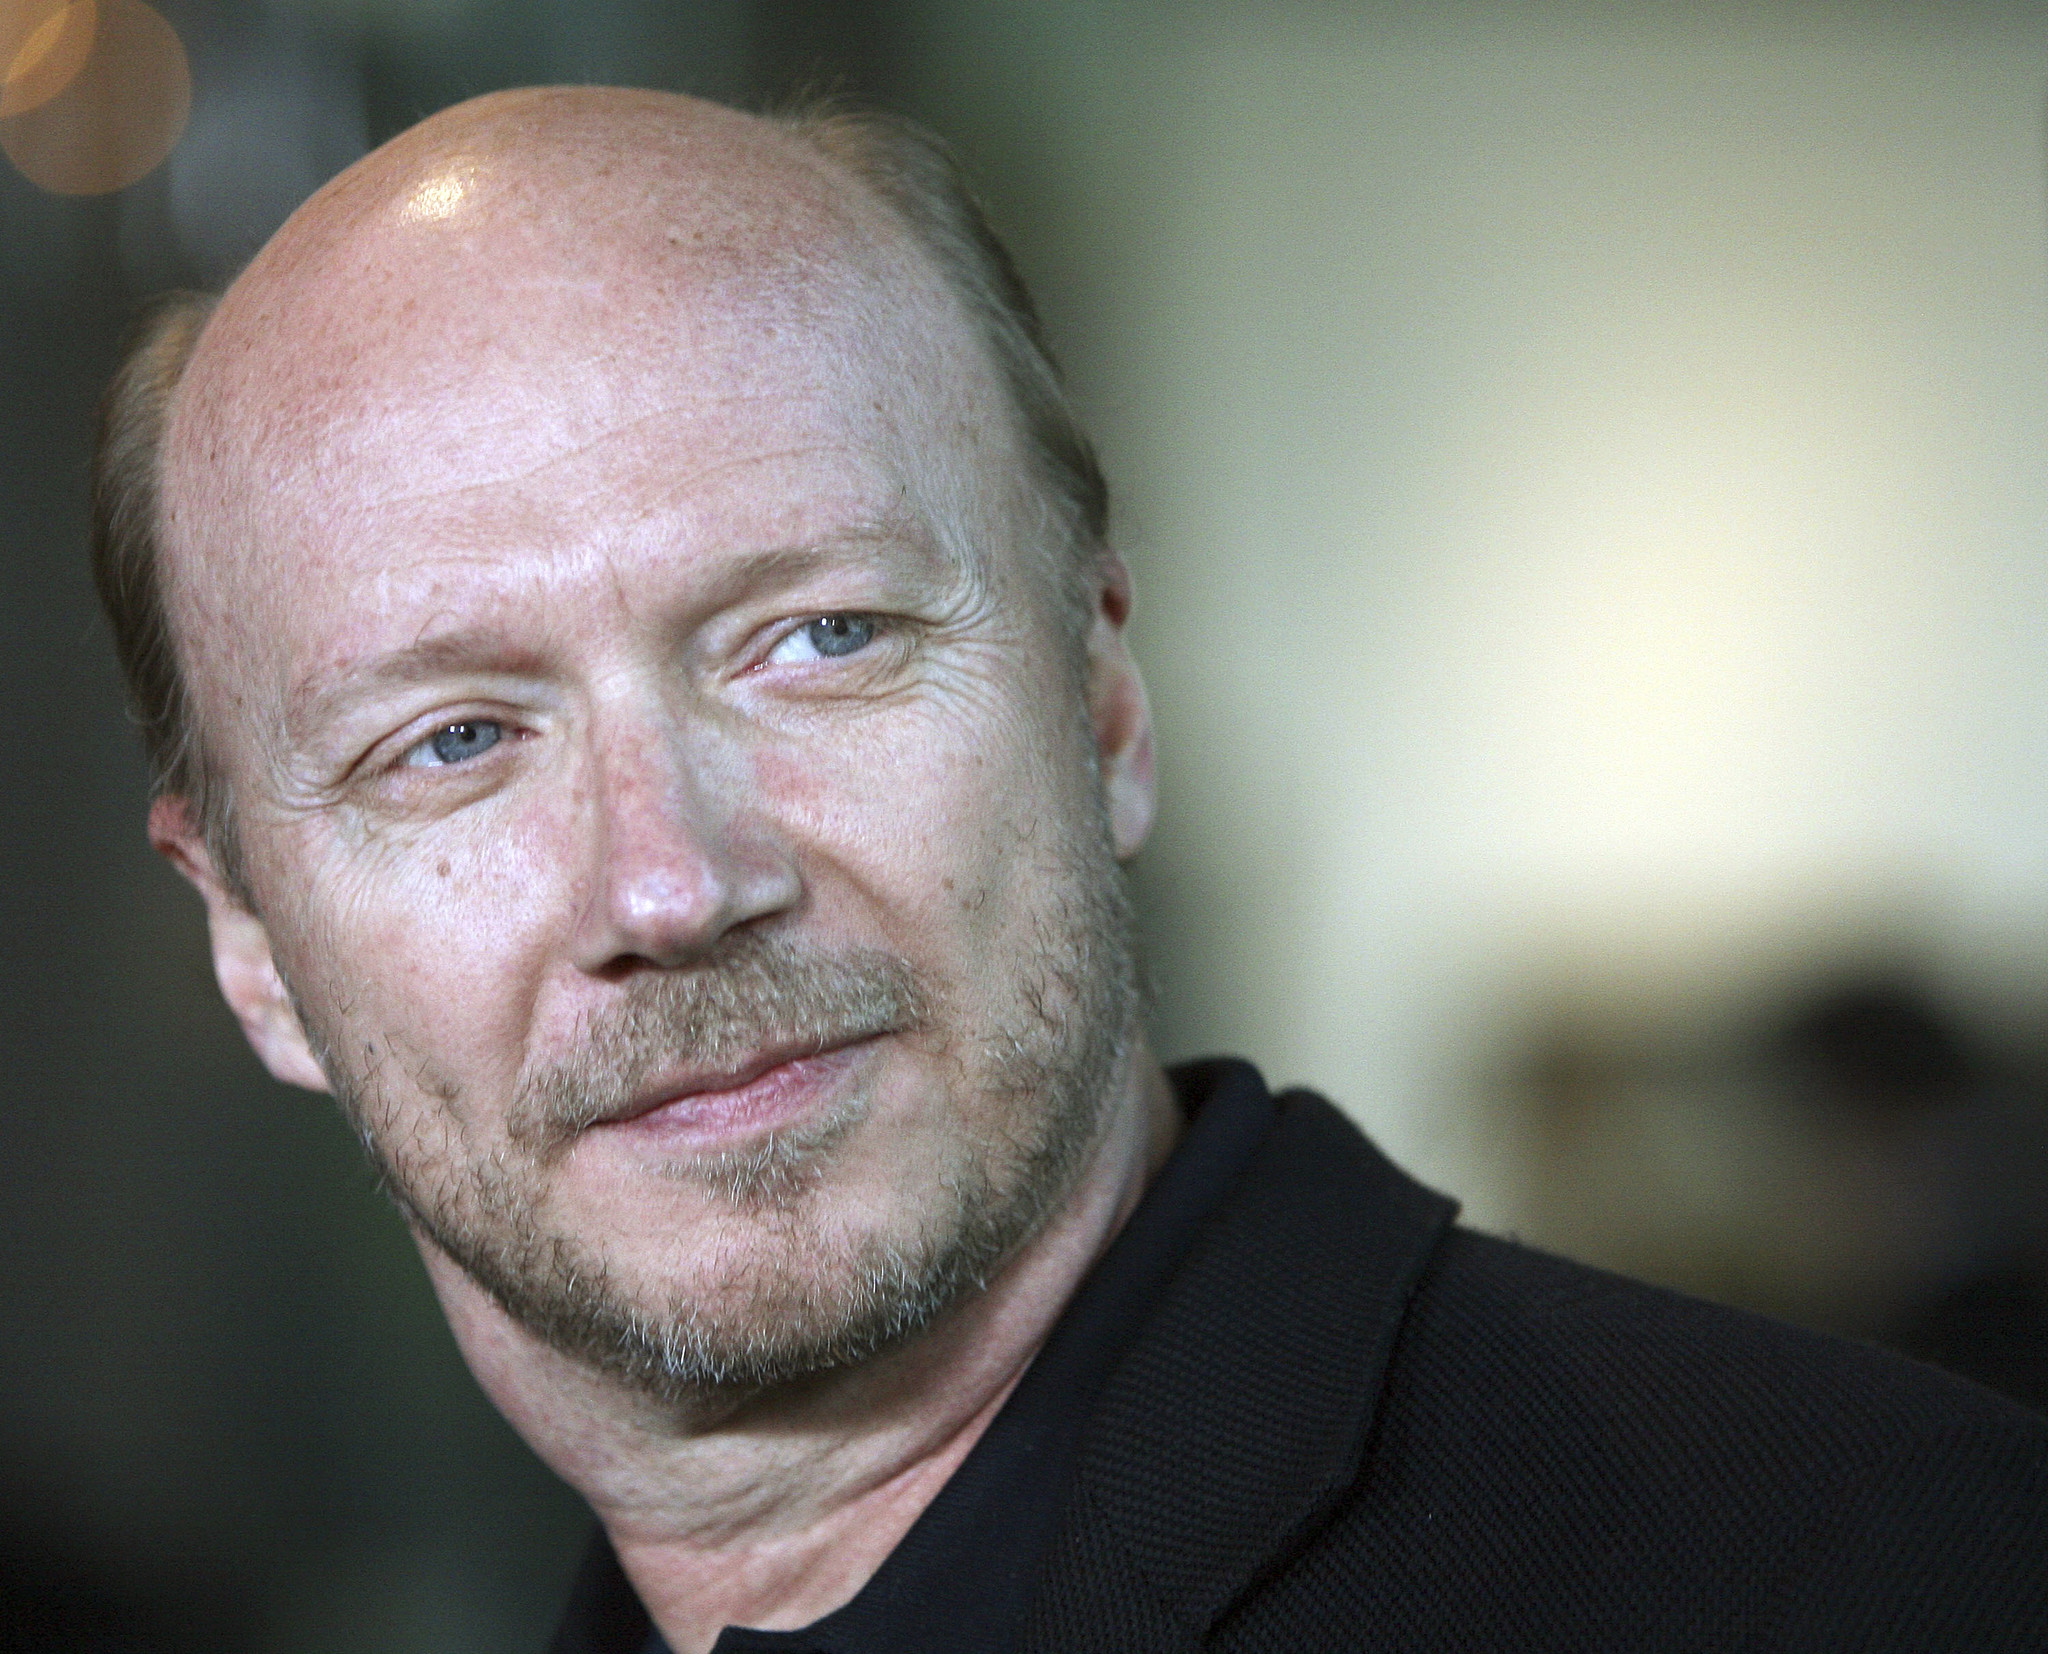 4 women accuse filmmaker Paul Haggis of sexual misconduct, including two rapes ...2048 x 1654